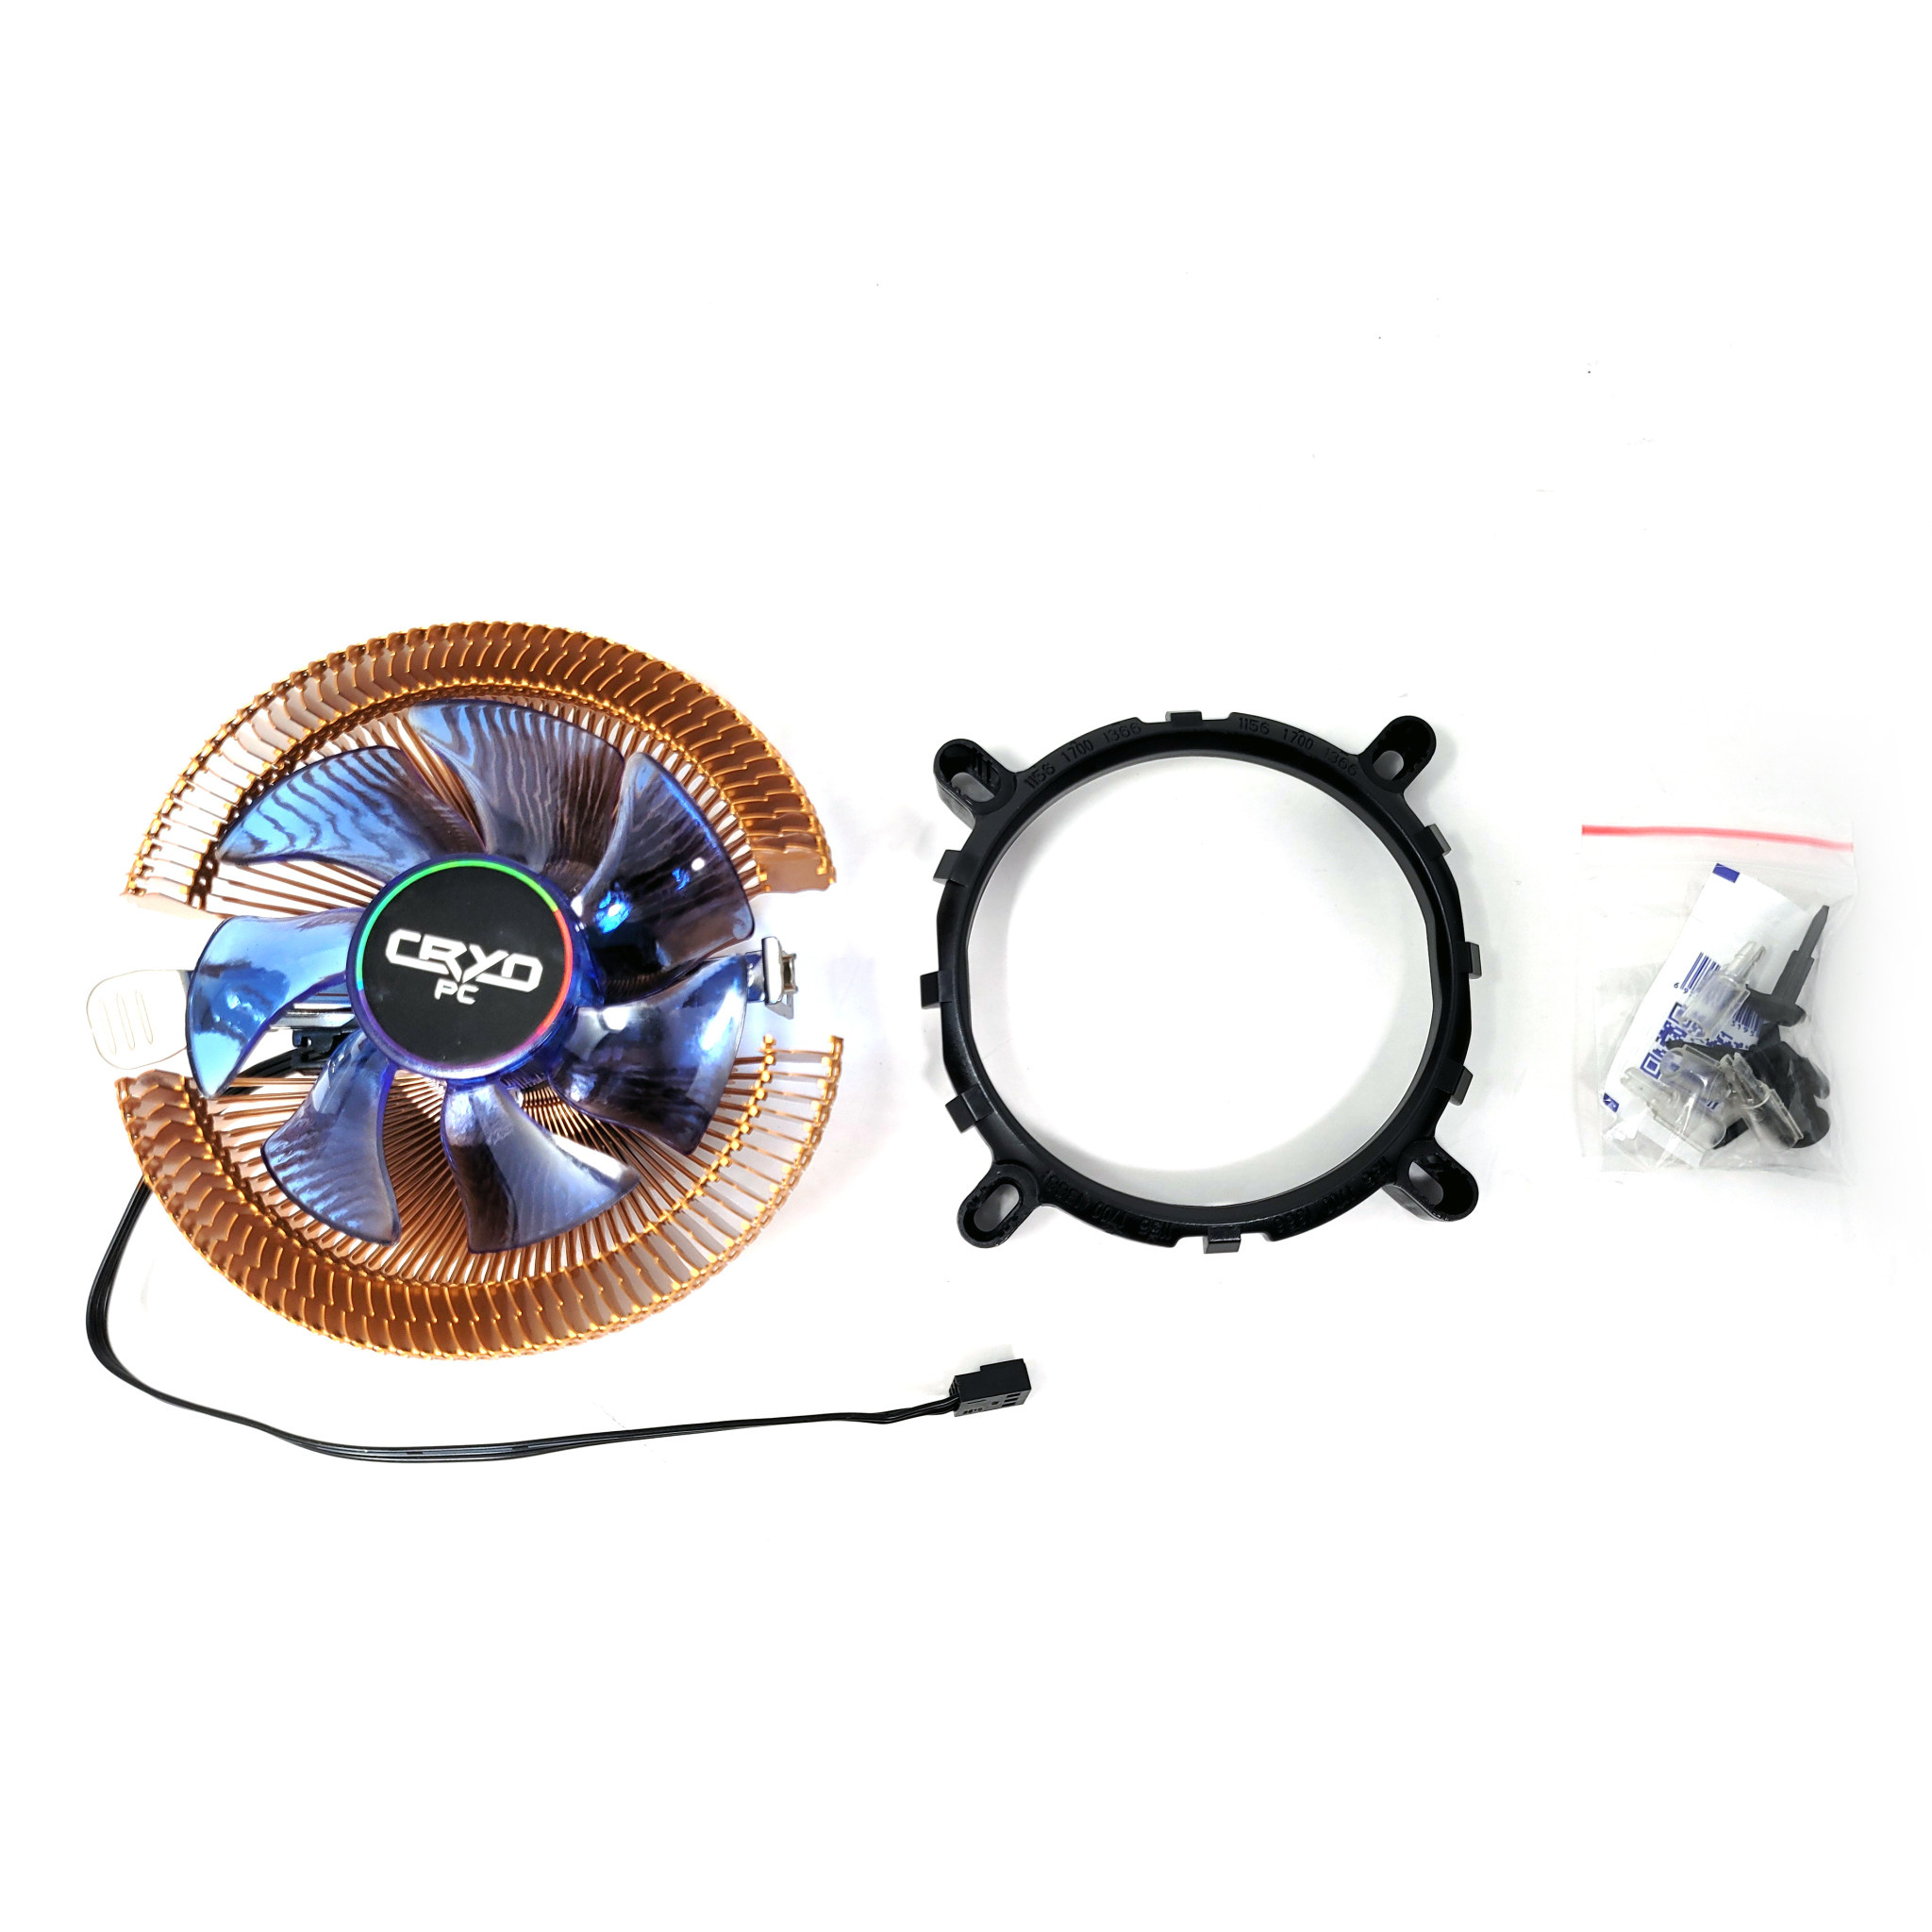 Cryo-PC CPC-ZA90, Low-profile Cooler with Blue LED Fan, - Inc.